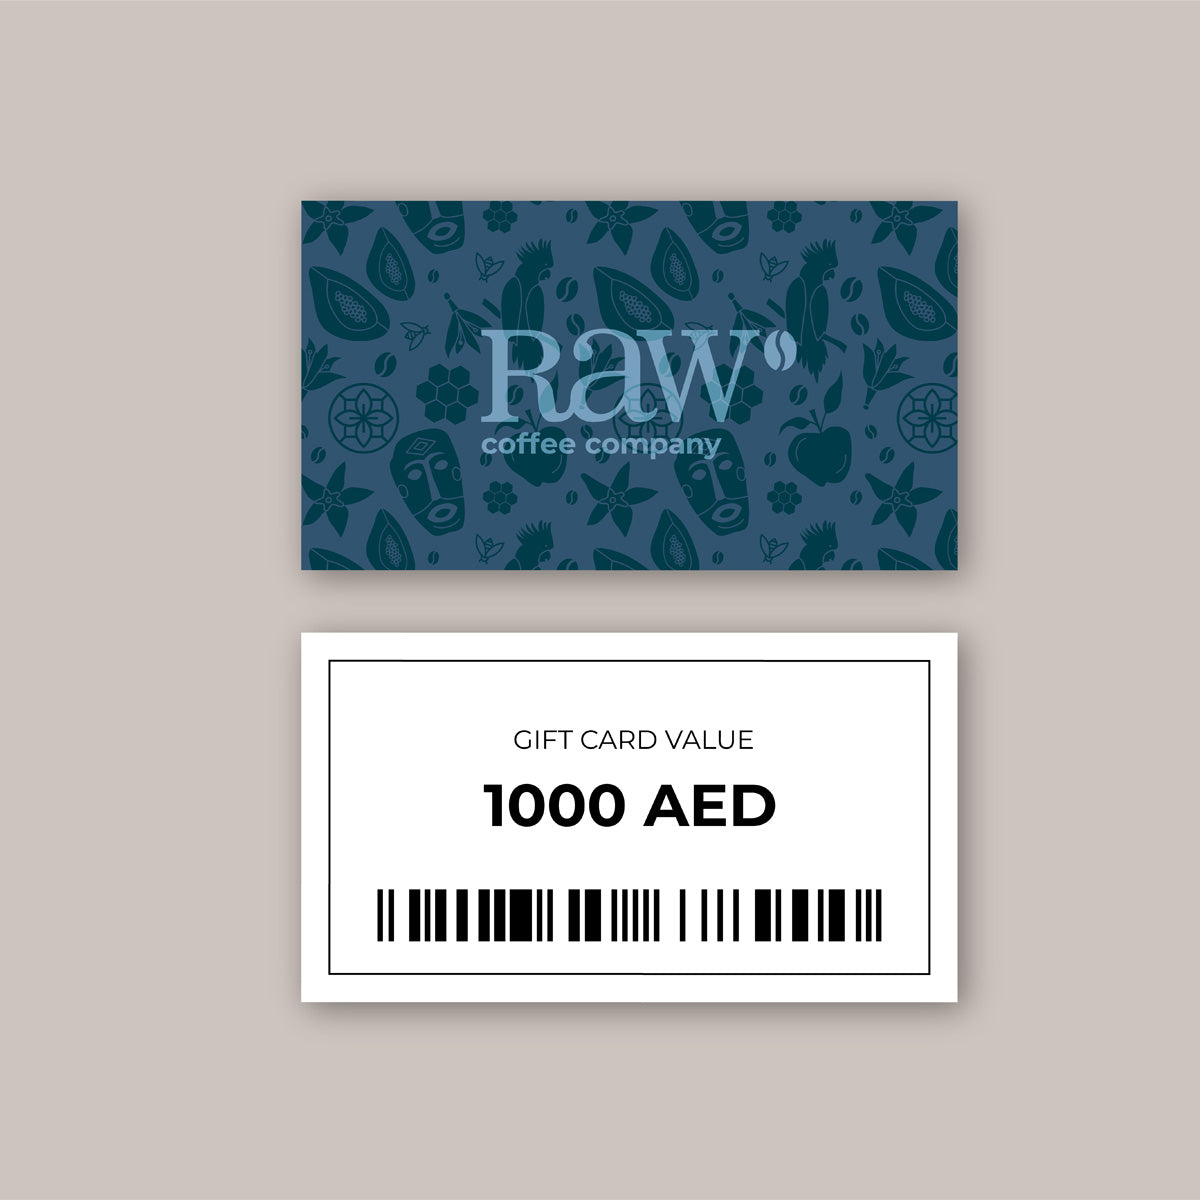 1000AED-Gift-Voucher_RAW-Coffee-Company